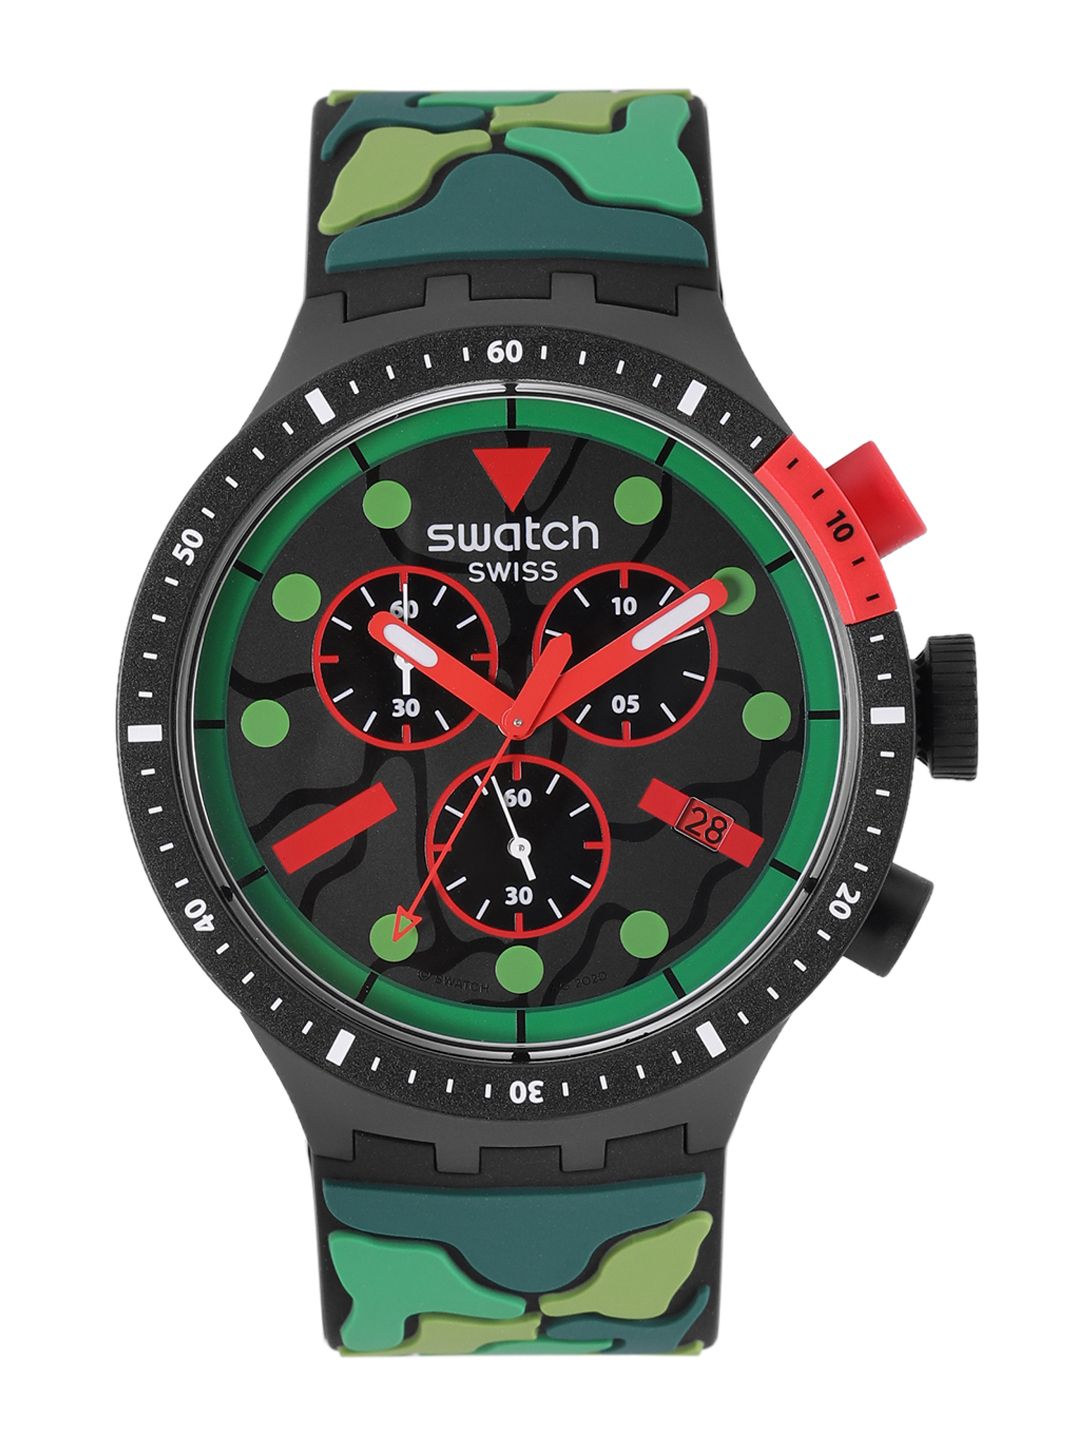 Swatch Unisex Olive Green Patterned Swiss Made Water Resistant Analogue Watch SB02B409 Price in India